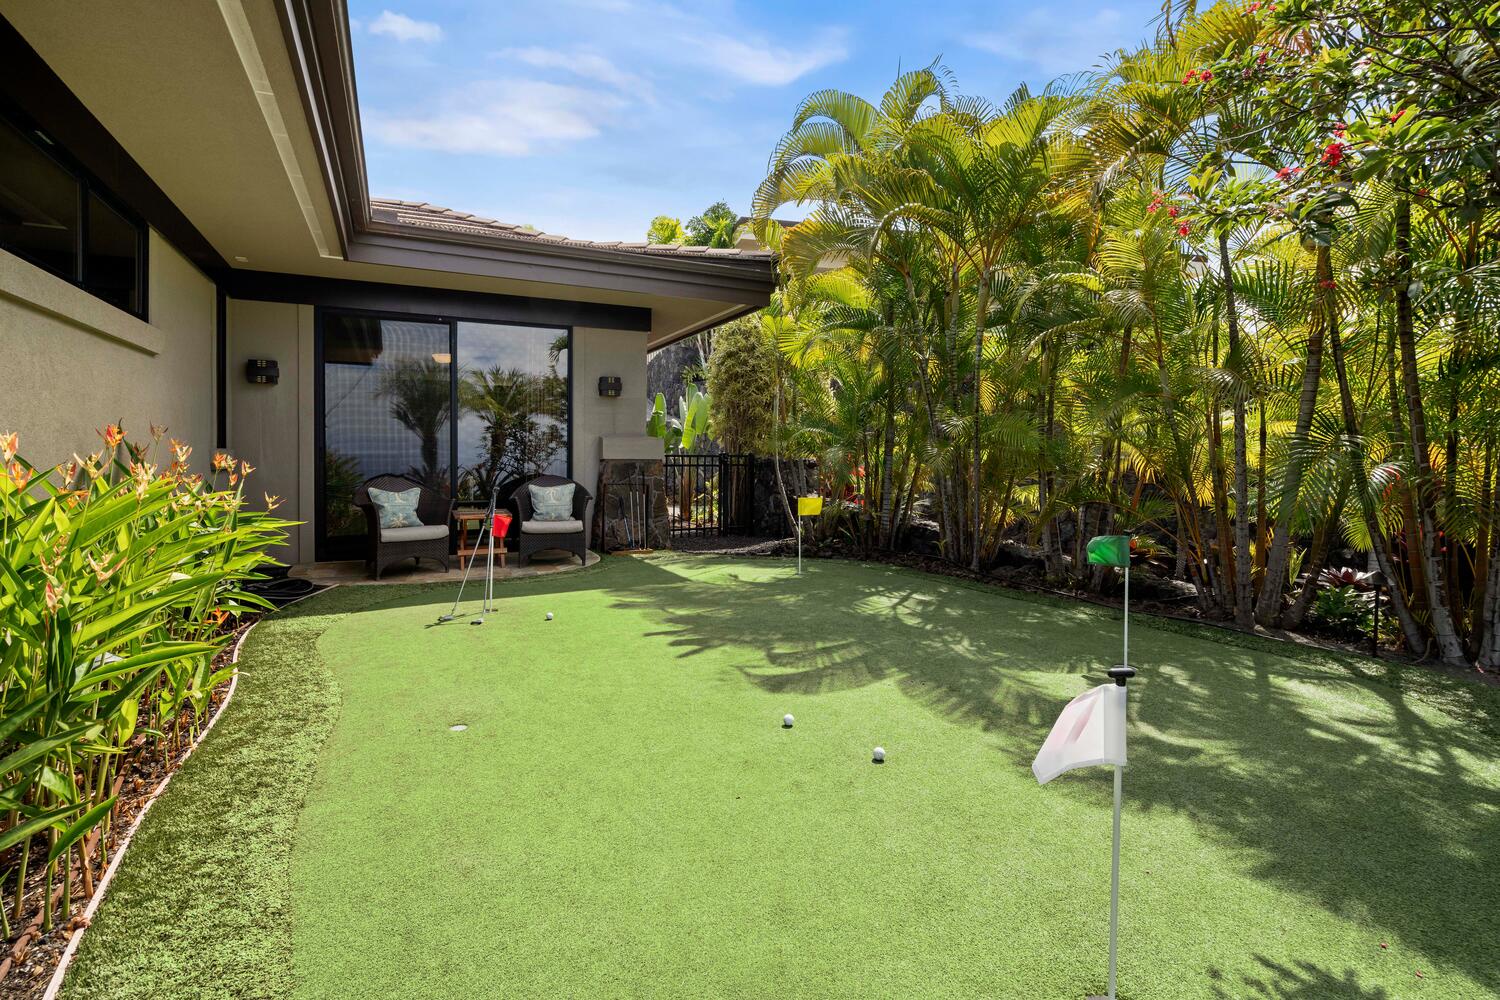 Kailua Kona Vacation Rentals, Island Oasis - Perfect your swing and aim on our pristine green putting area, where golf dreams take shape.